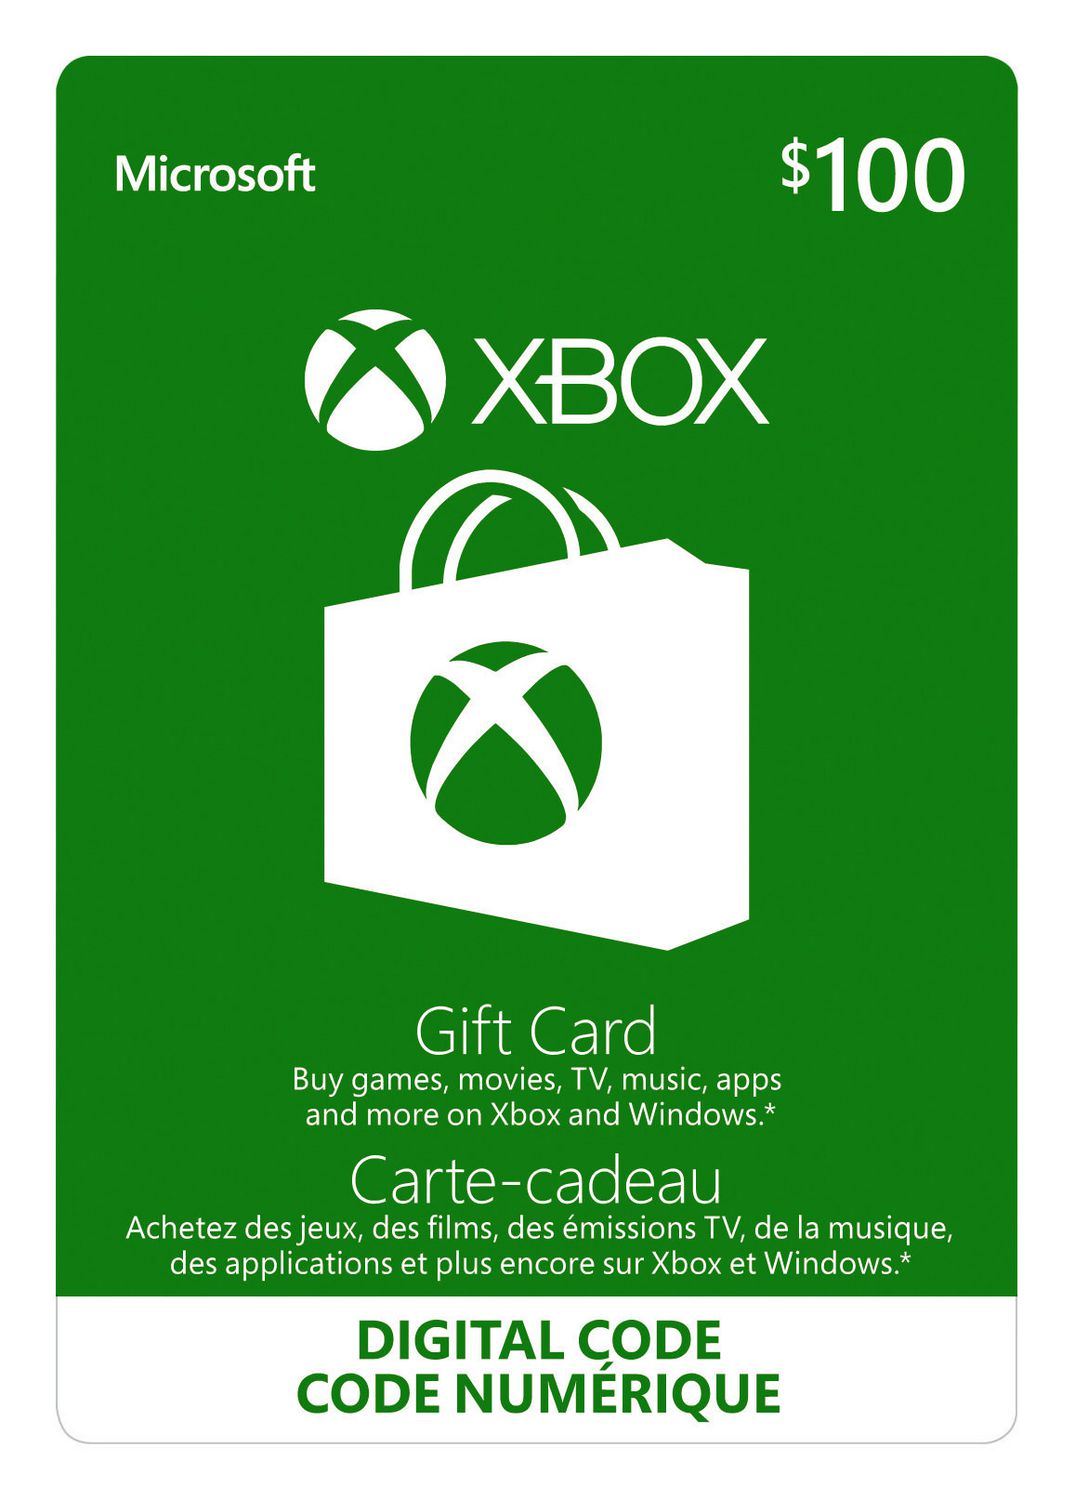 xbox live gift card 1 month